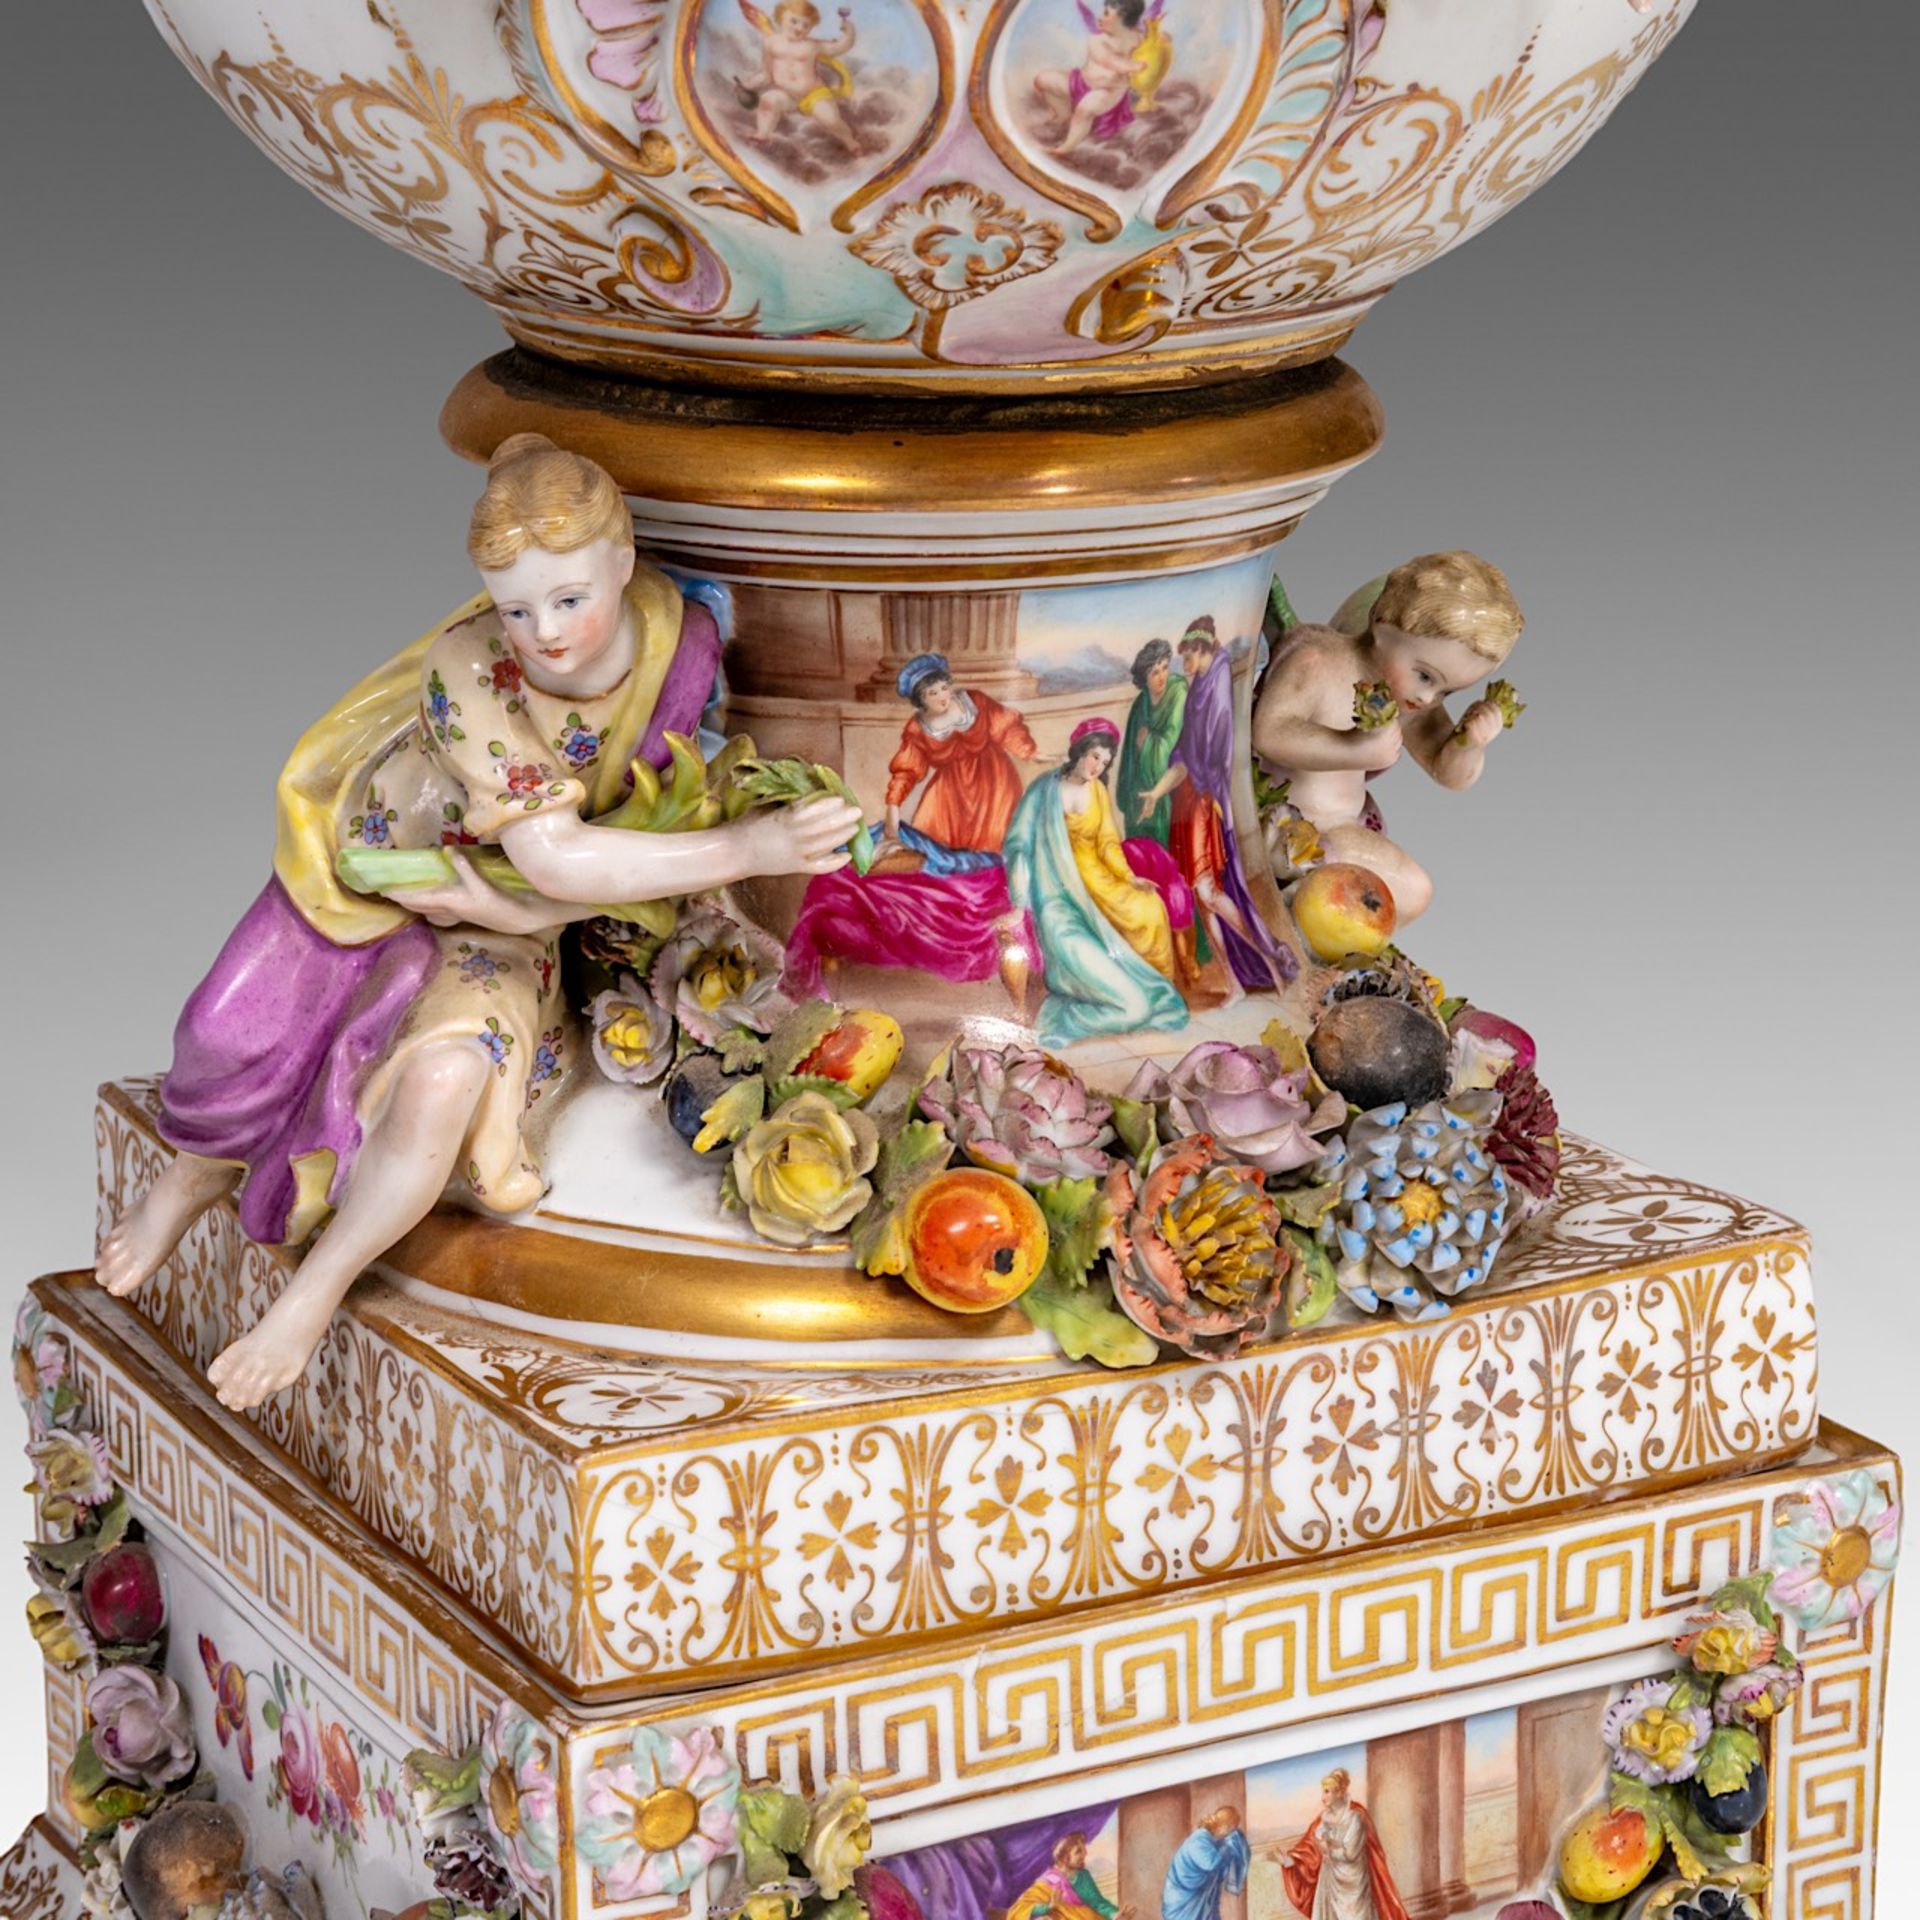 A very imposing Saxony porcelain vase on stand, Postschappel manufactory, Dresden, H 107 cm (total) - Image 16 of 23